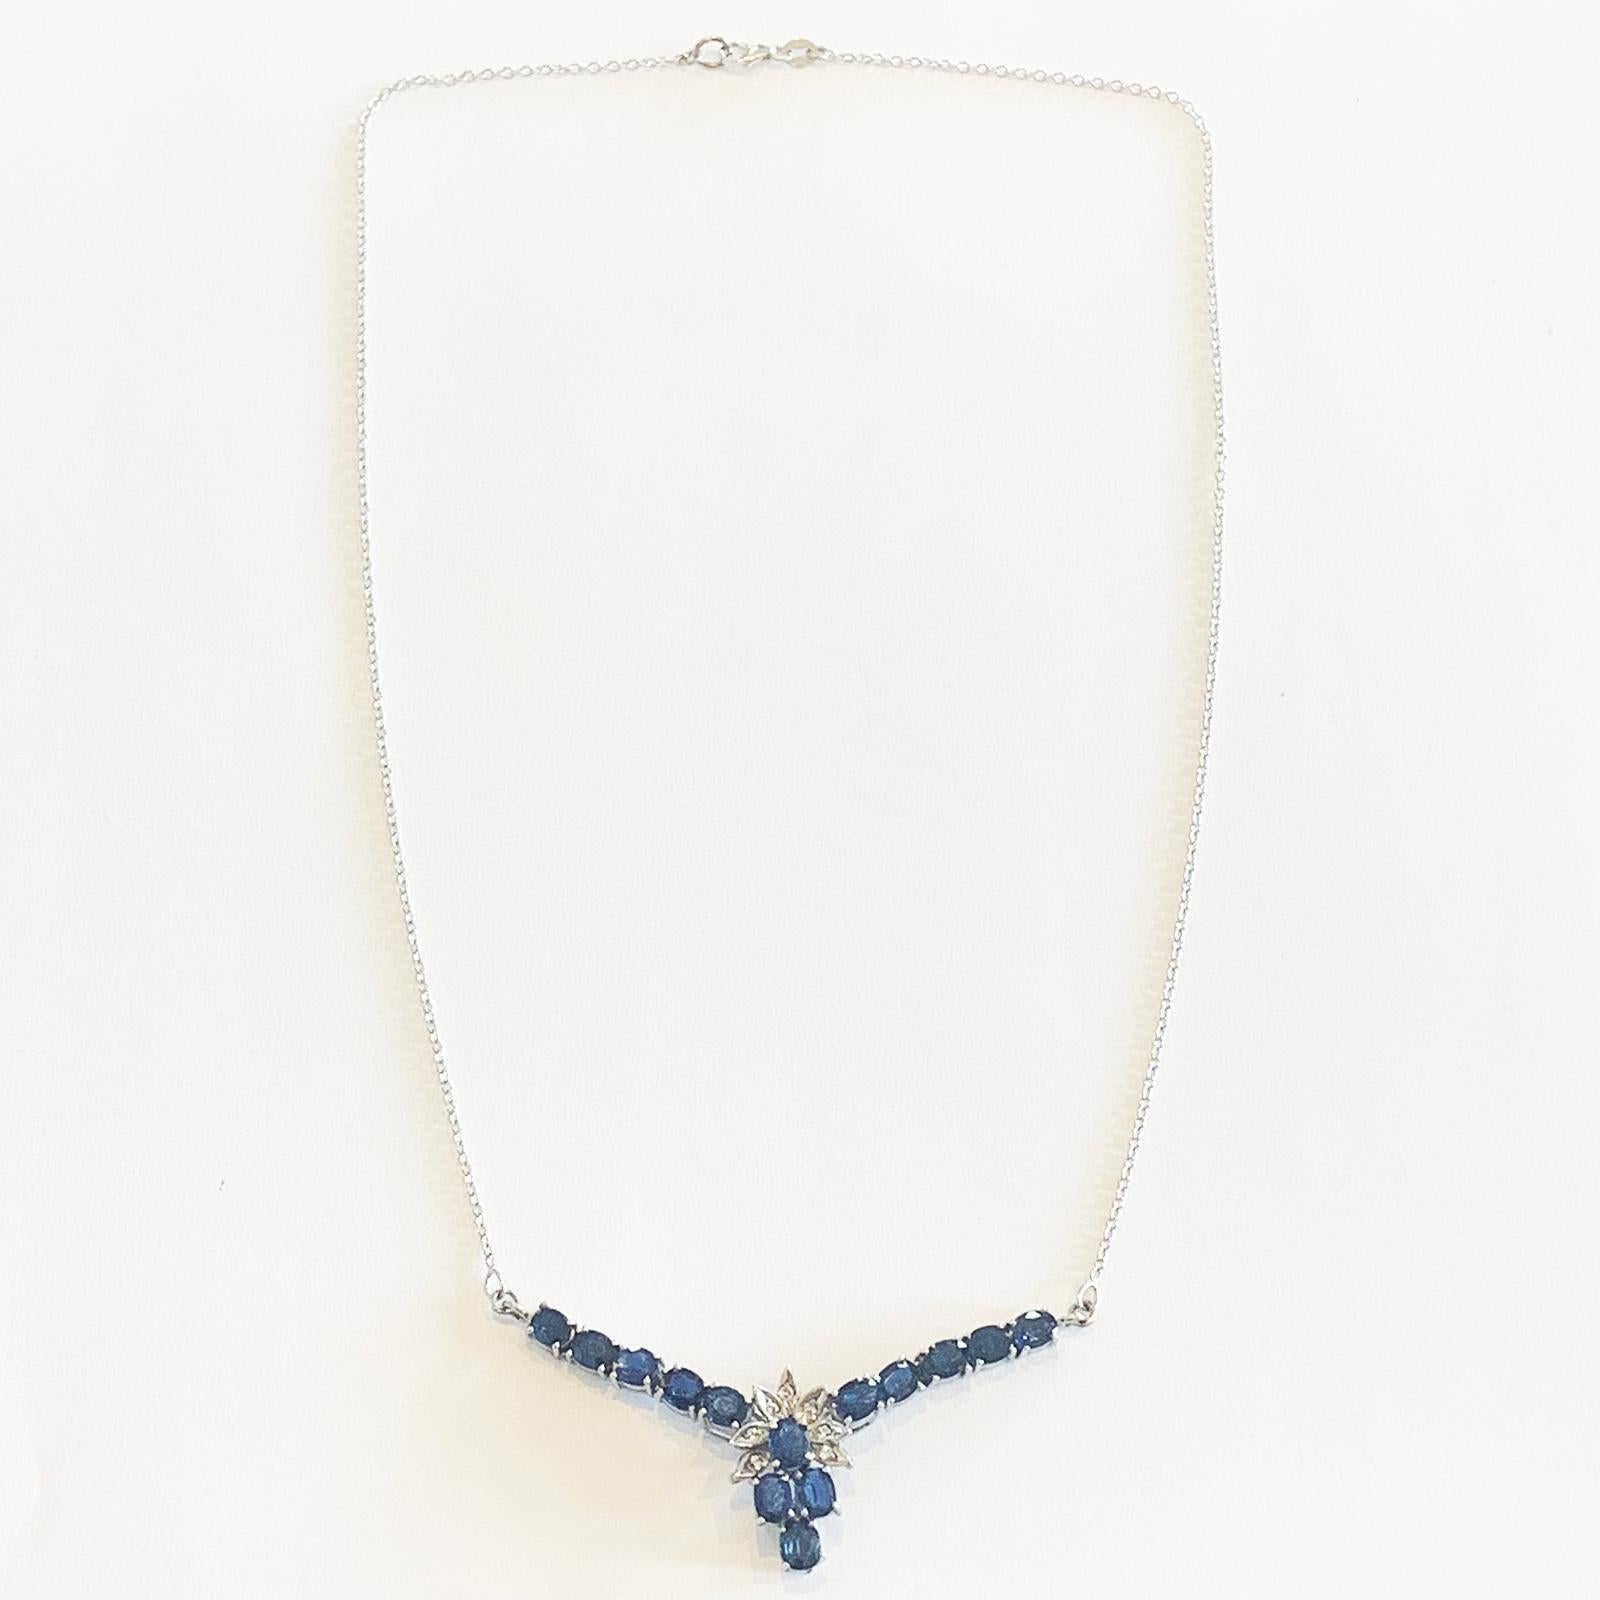 Art Deco Necklace of Palladium and 10KT White Gold. Finely faceted Blue Sapphires and Diamonds set in Palladiumm with a white gold chain marked 14KT.. Palladium is a rare metal, going back to discovery in 1802, and similar to Platinum, but not used